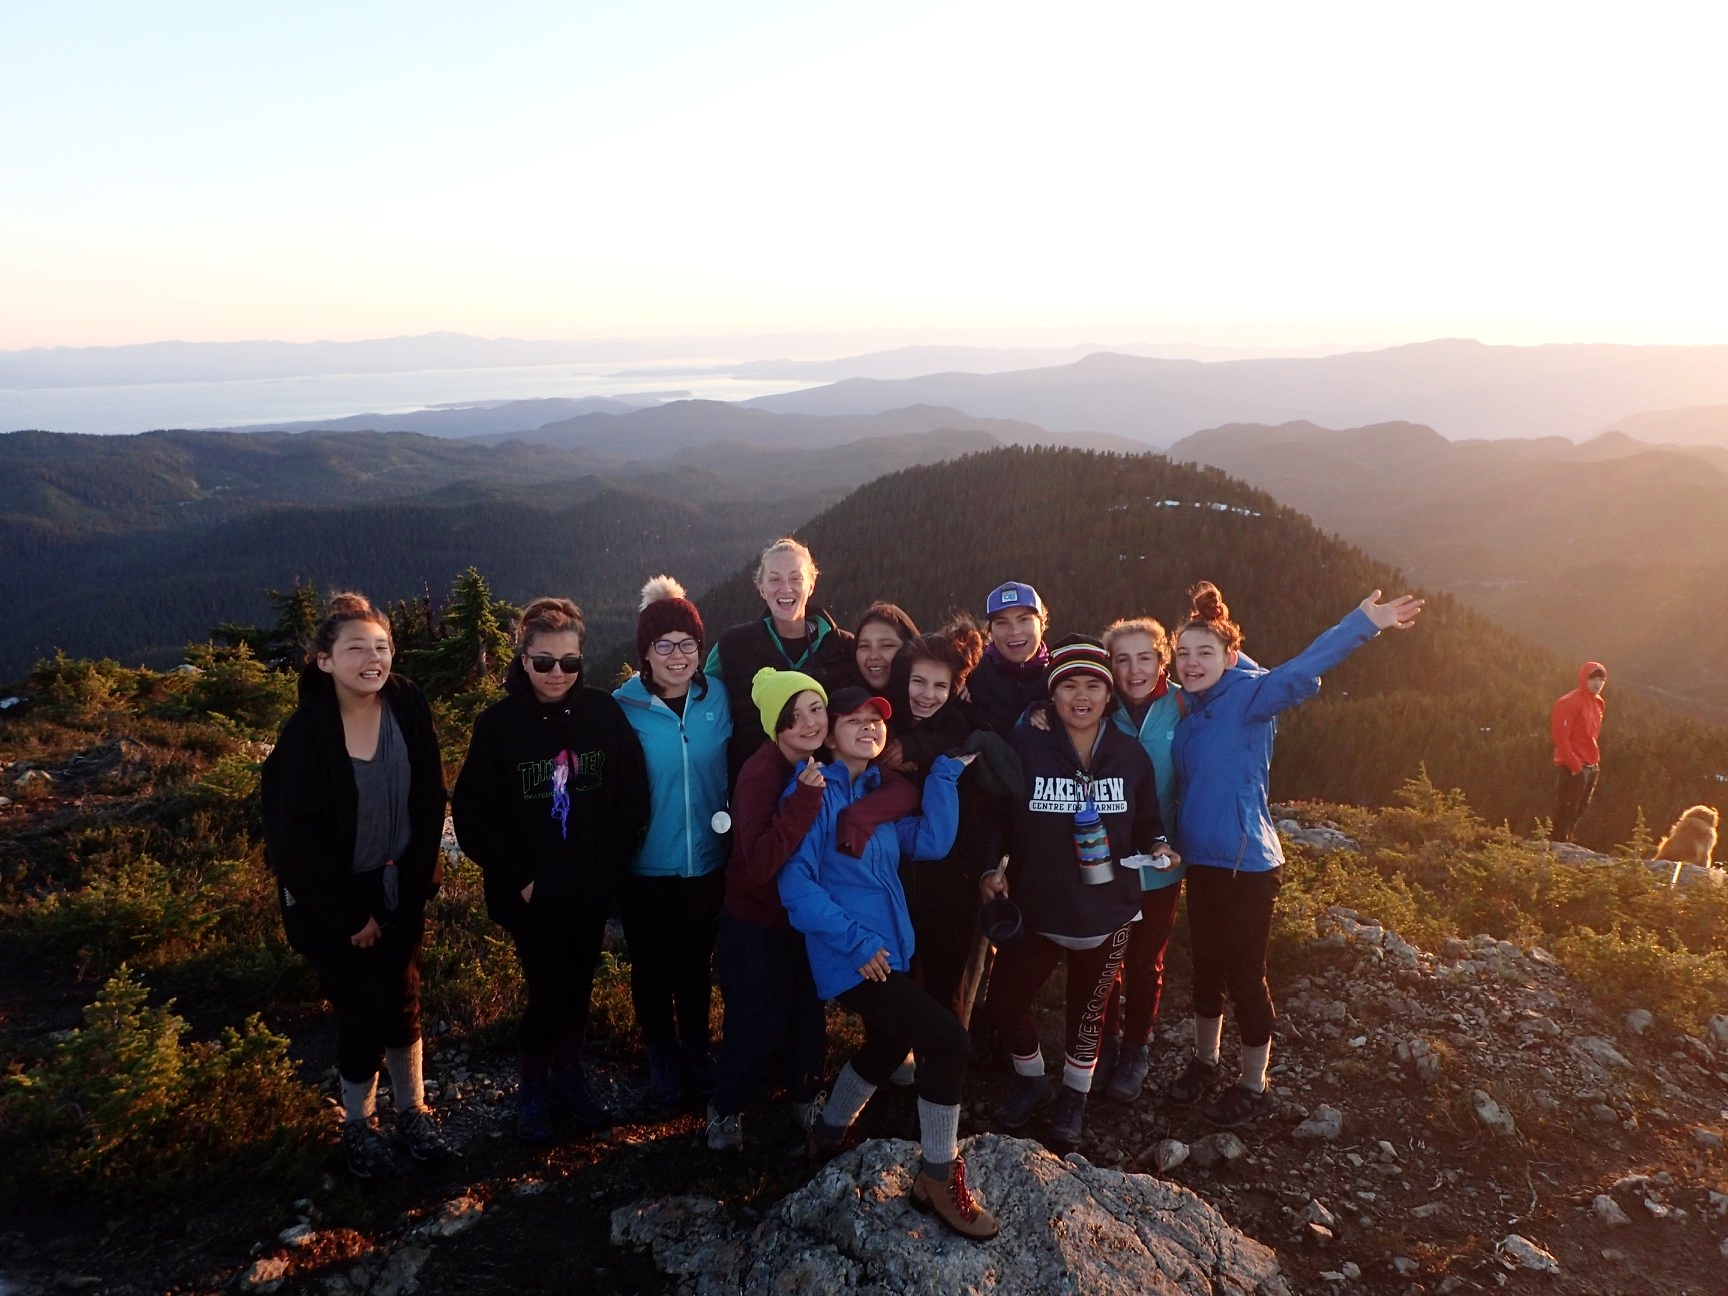  Group photo of 12 smiling teenage girls on mountaintop at sunset 